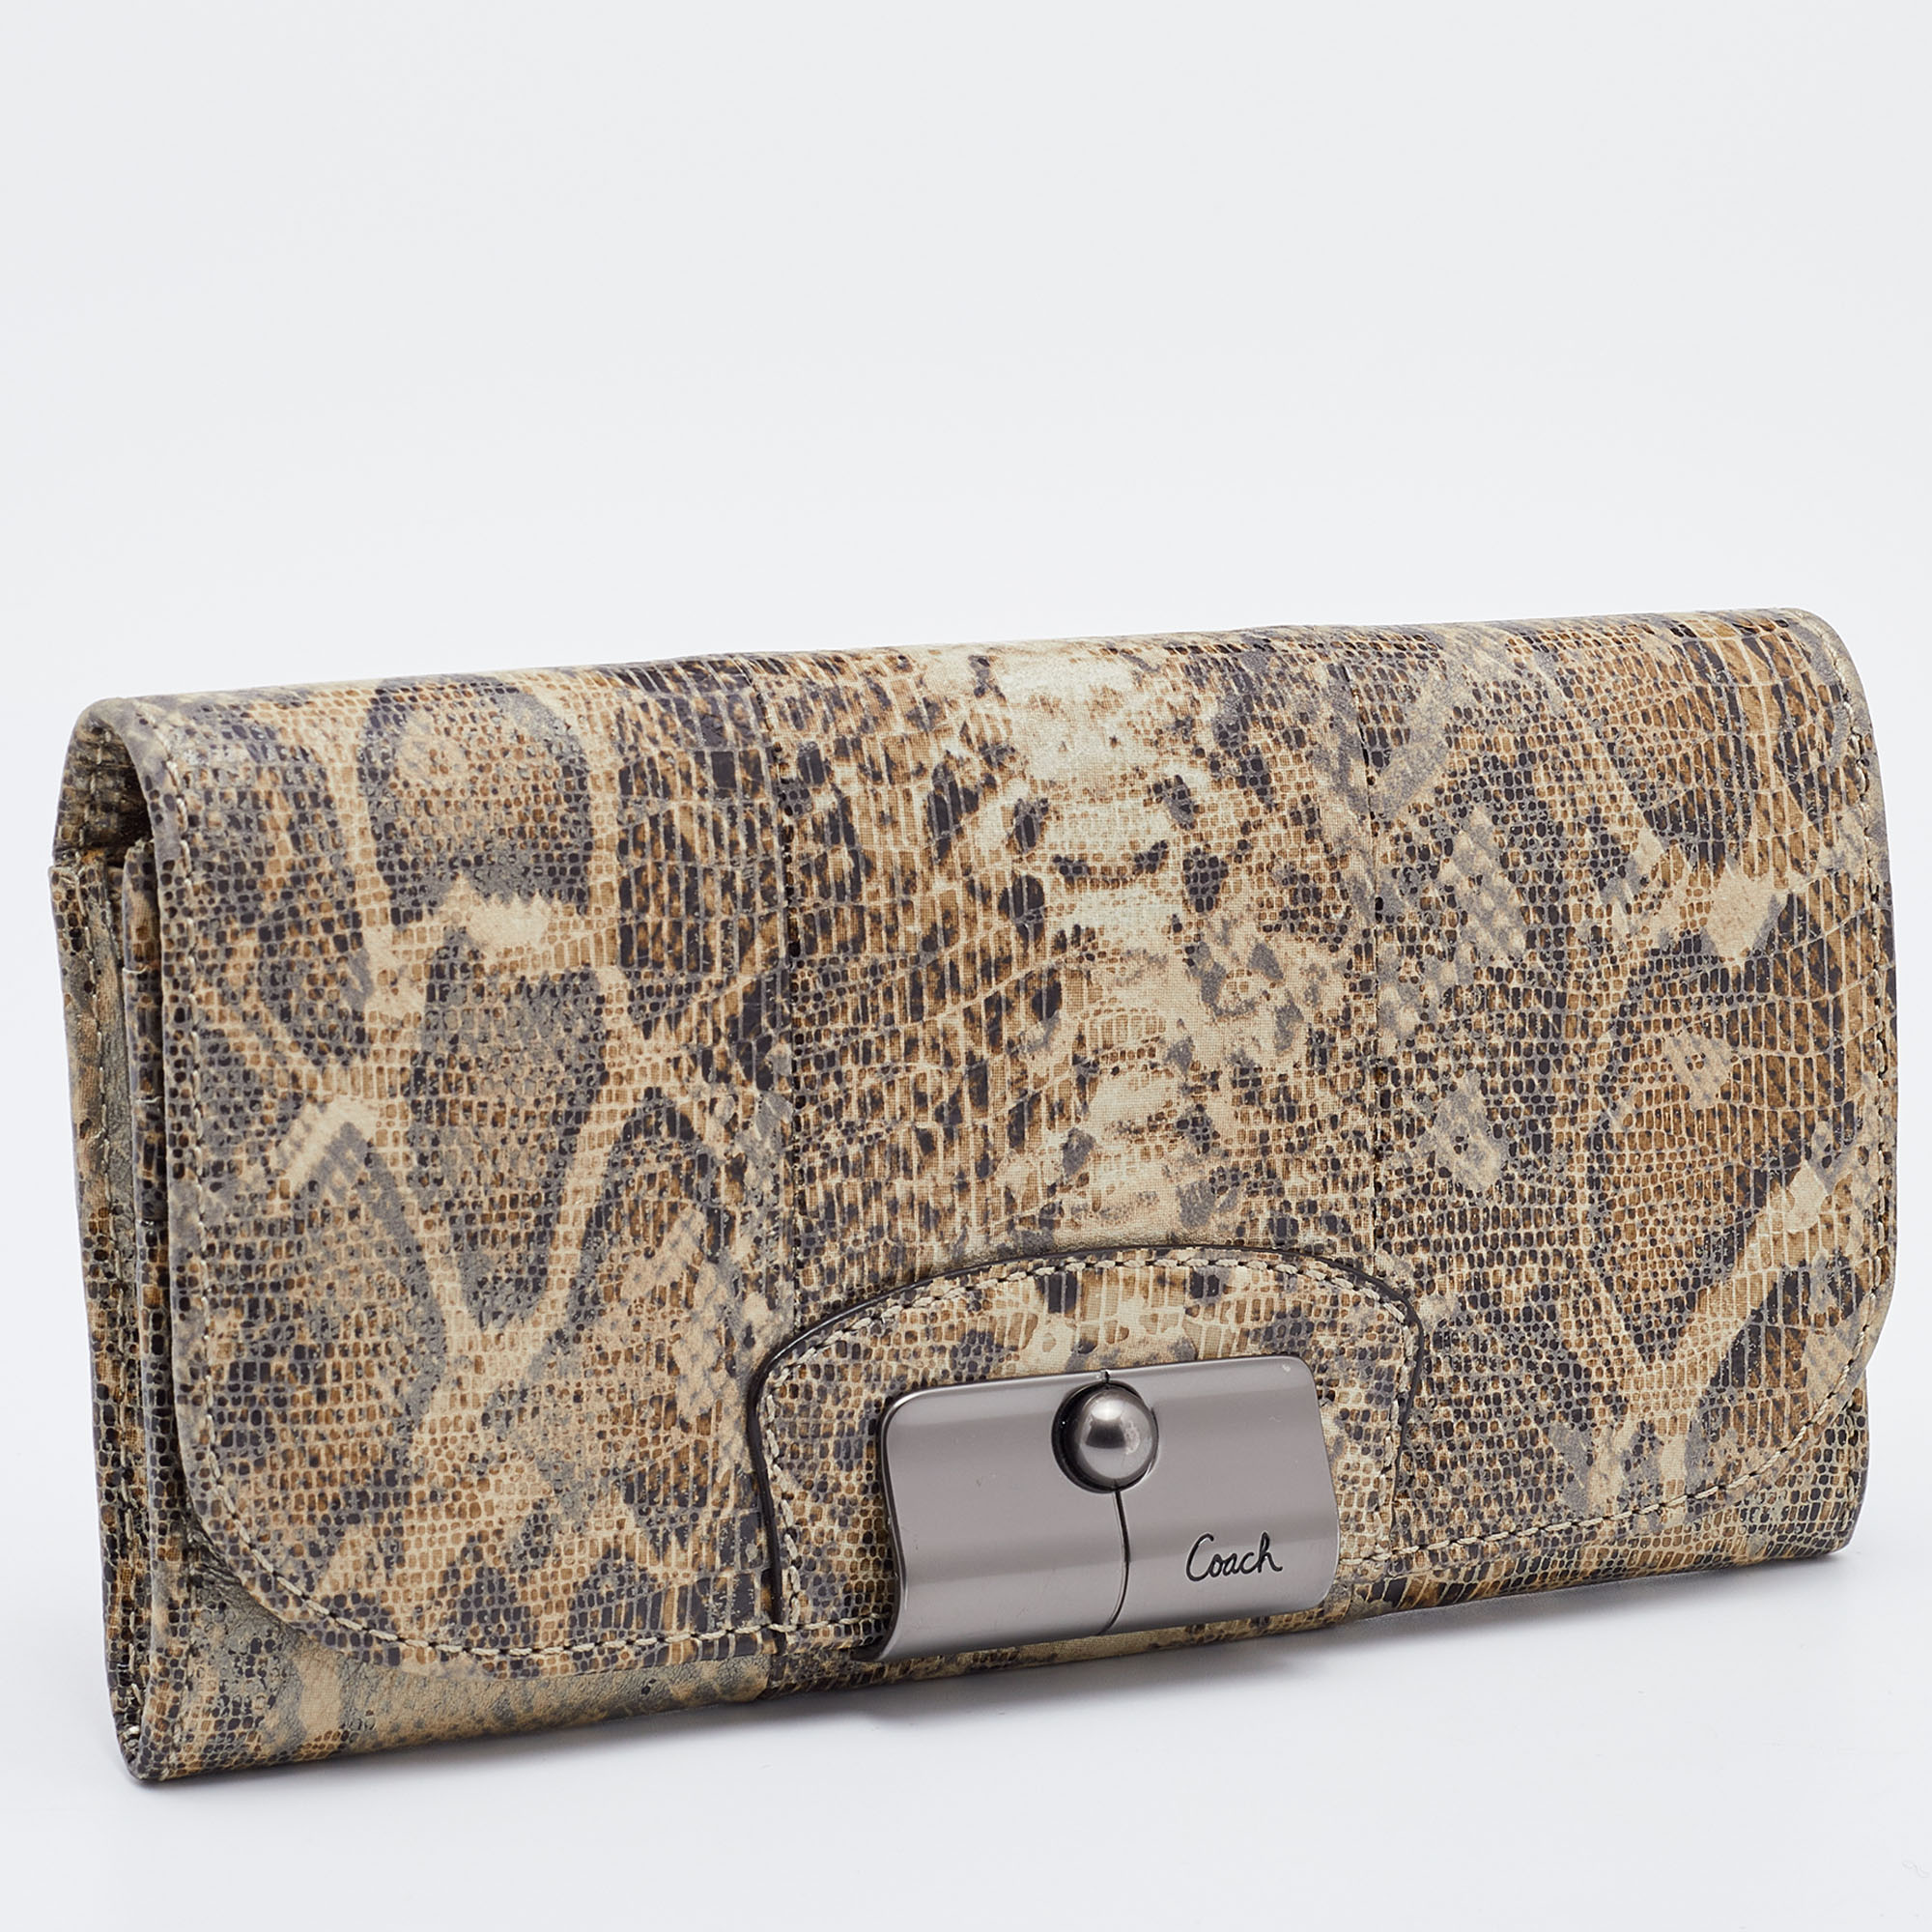 Coach Brown/Beige Python Embossed Leather Flap Continental Wallet